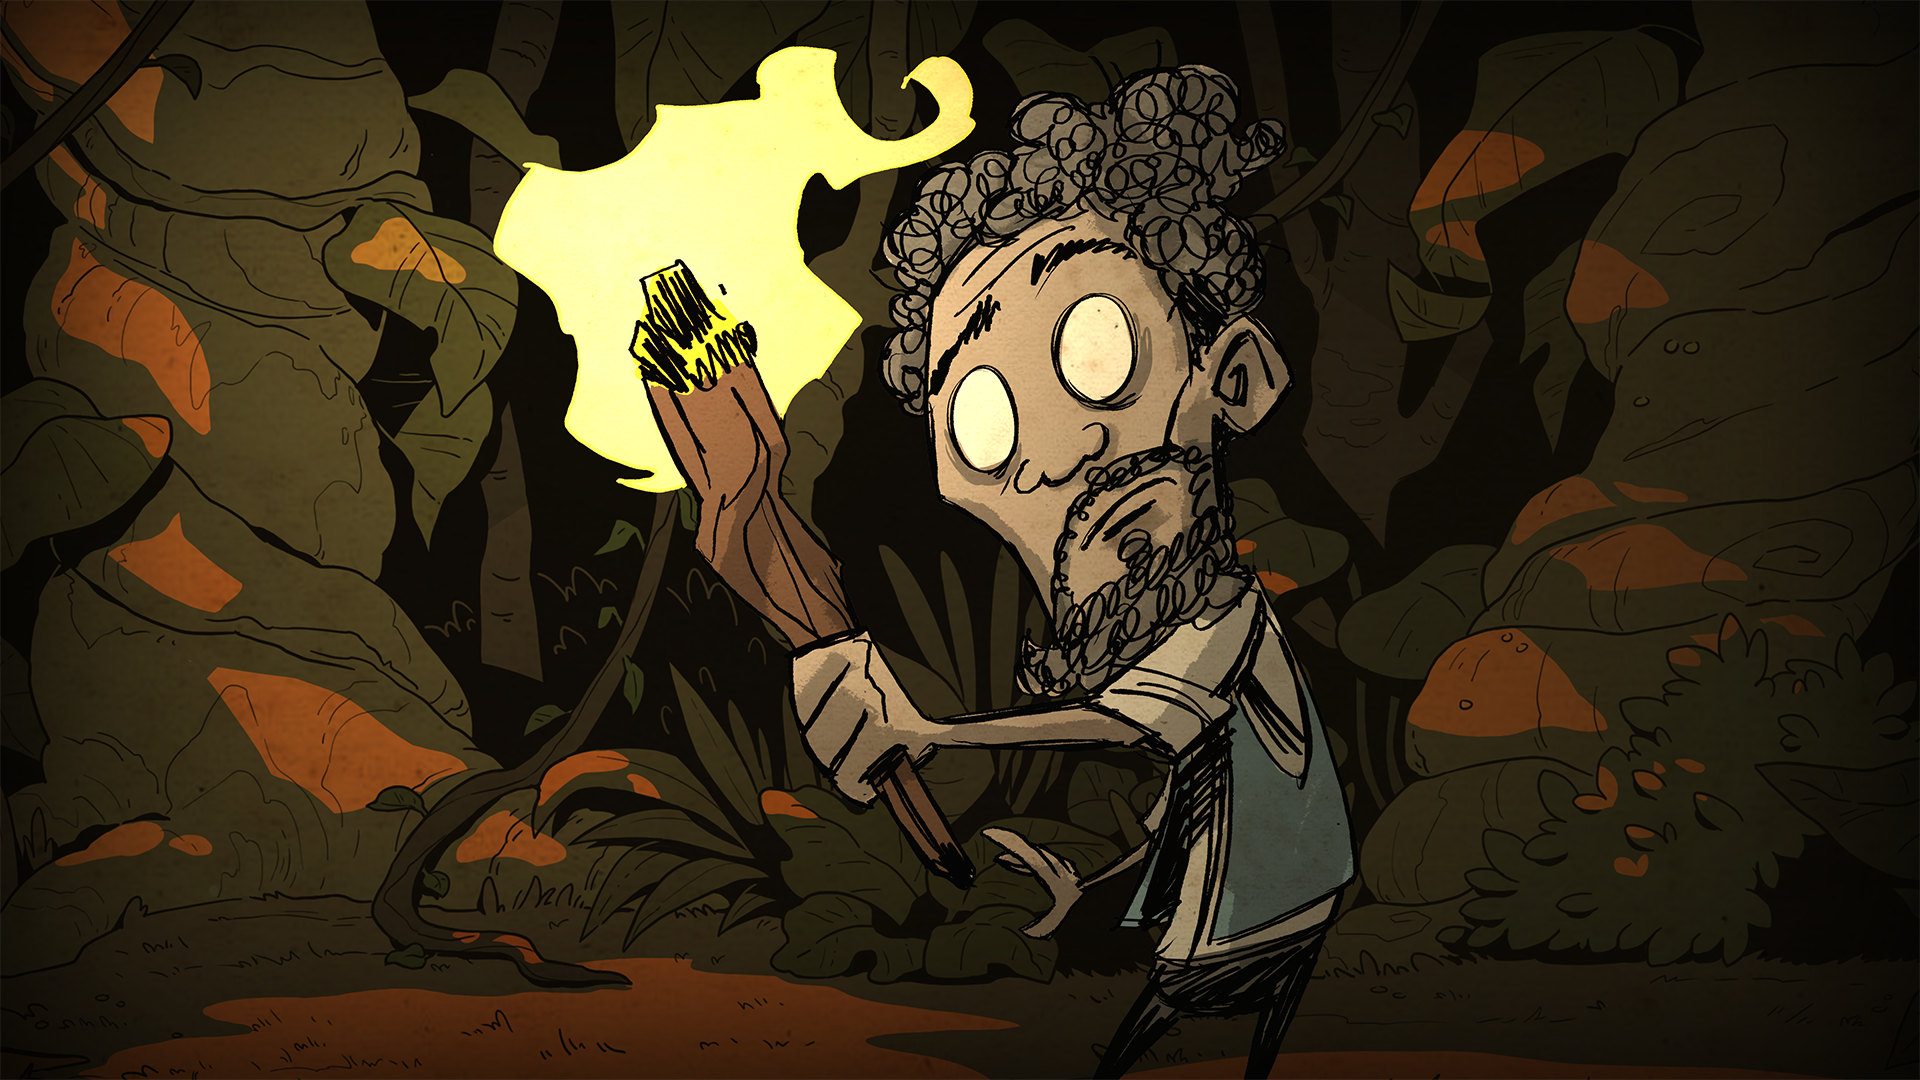 Don t starve starving games. Варли донт старв. Don't Starve together Варли. Варли don't Starve арт. ДСТ don't Starve together.